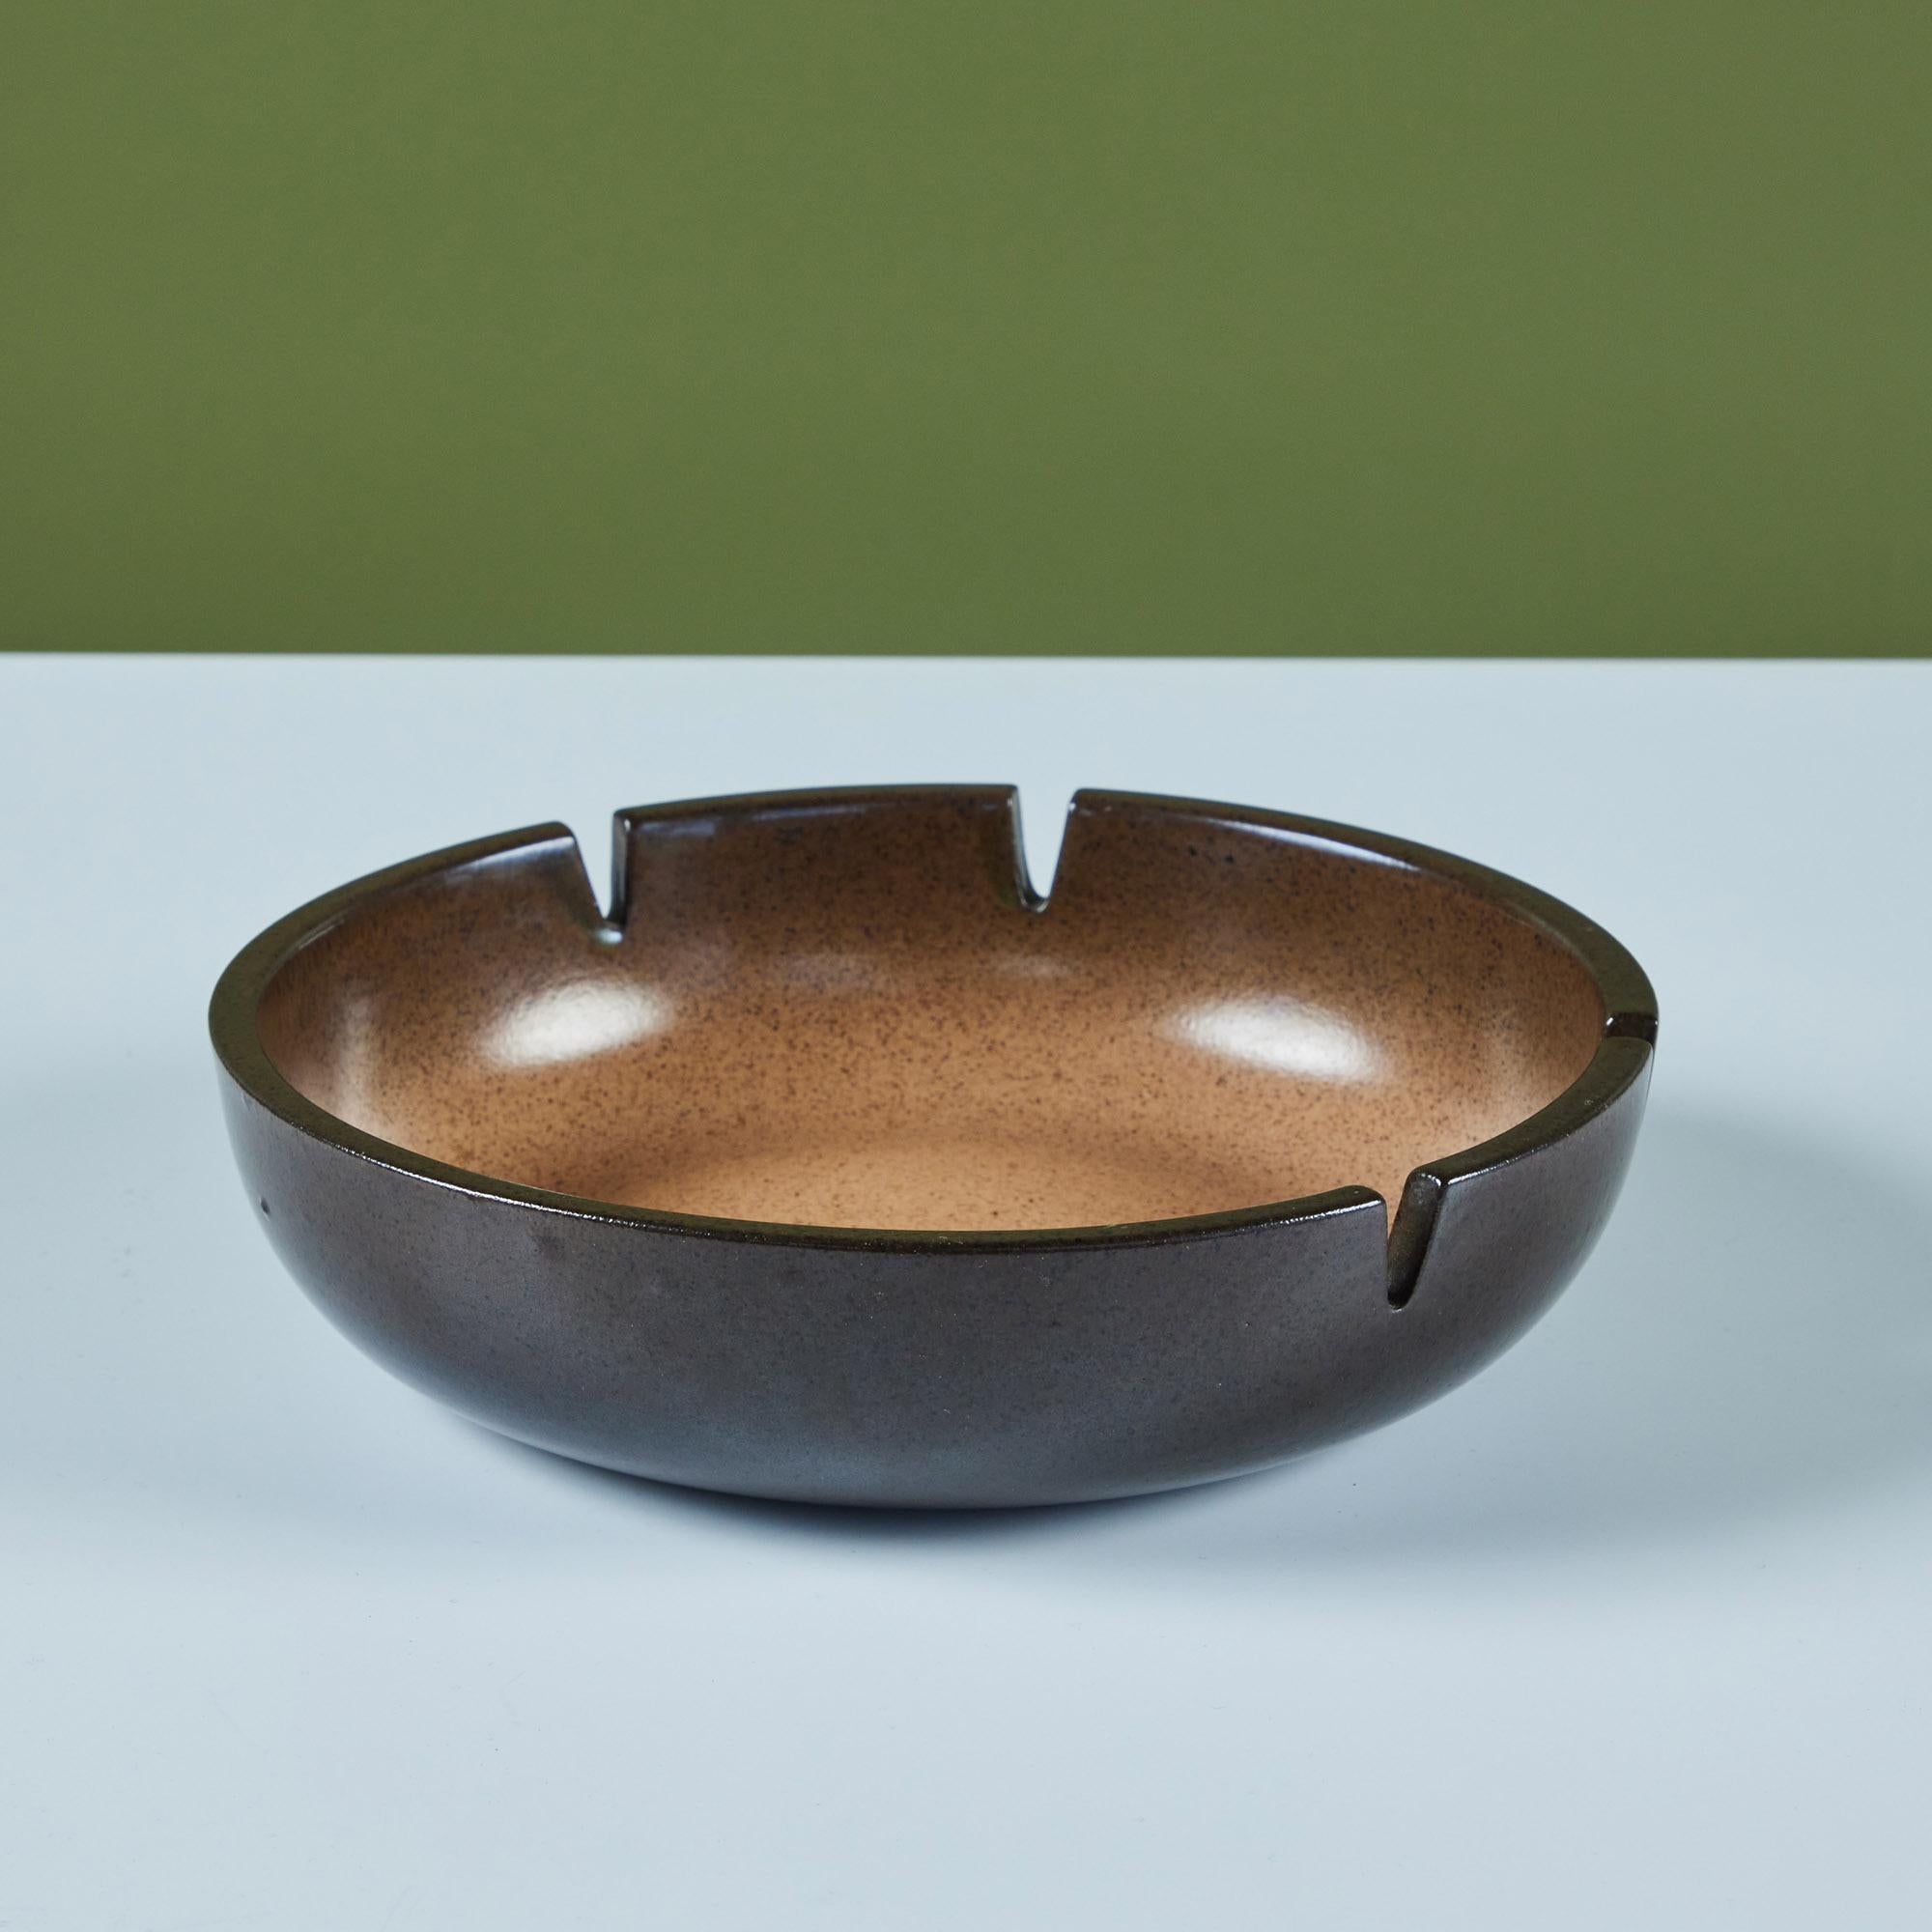 Glazed ceramic ashtray by Heath Ceramics, c.1960s, USA. The ashtray features a dark brown exterior speckle glaze which ombres into a tan speckle glaze on the interior. There are four holding slots for cigarettes. Can also be used as a decorative